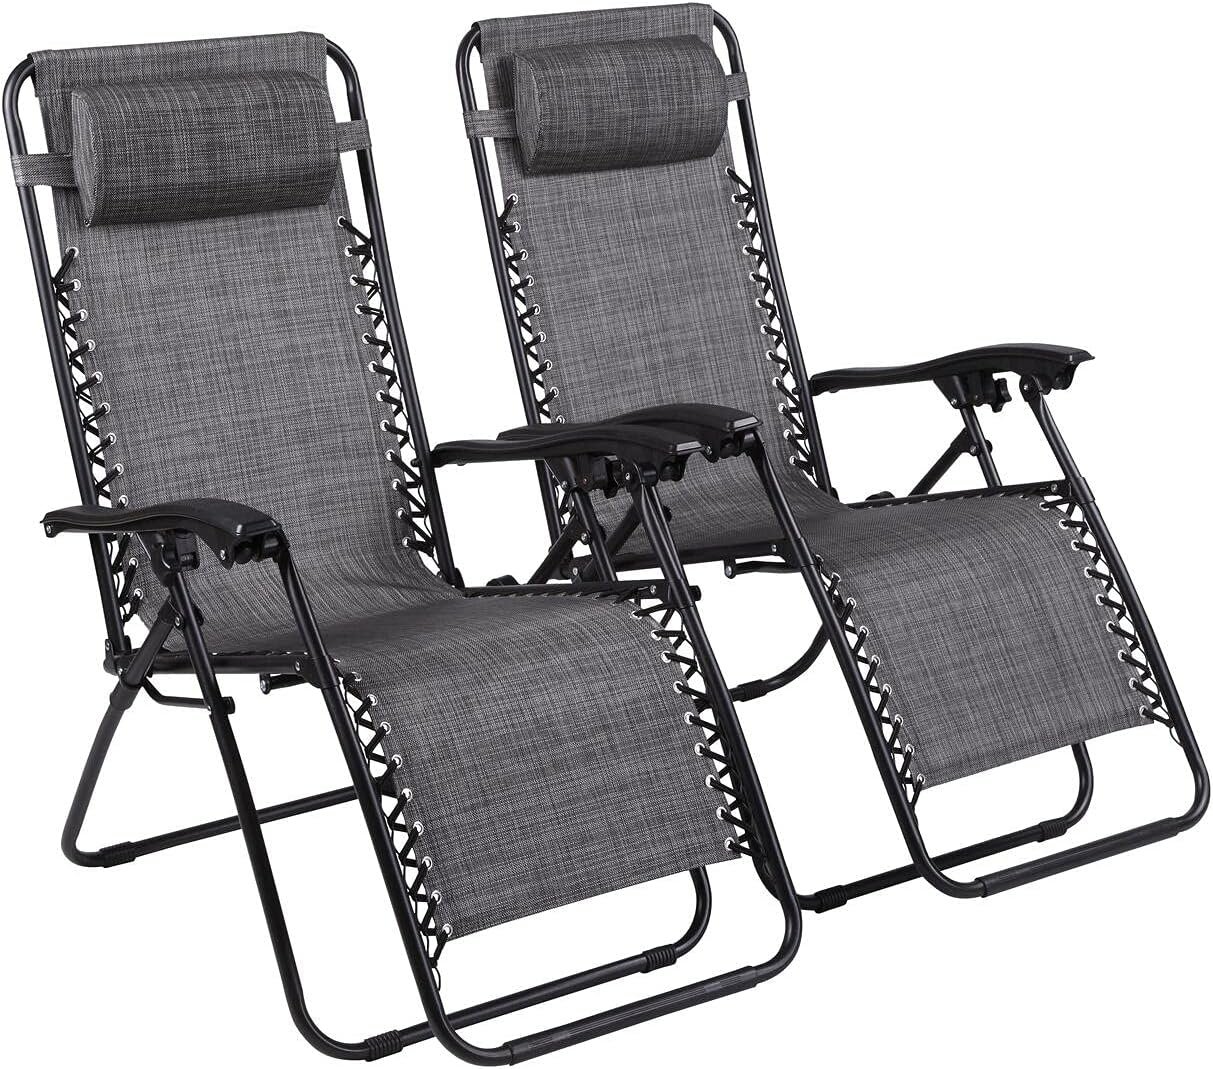 Zero Gravity Chairs Set of 2 Pool Lounge Chair Zero Gravity Recliner Lawn Patio Outdoor Porch Beach Backyard Anti Gravity Chair Folding Reclining Camping Chair with Headrest by Naomi Home - Grey